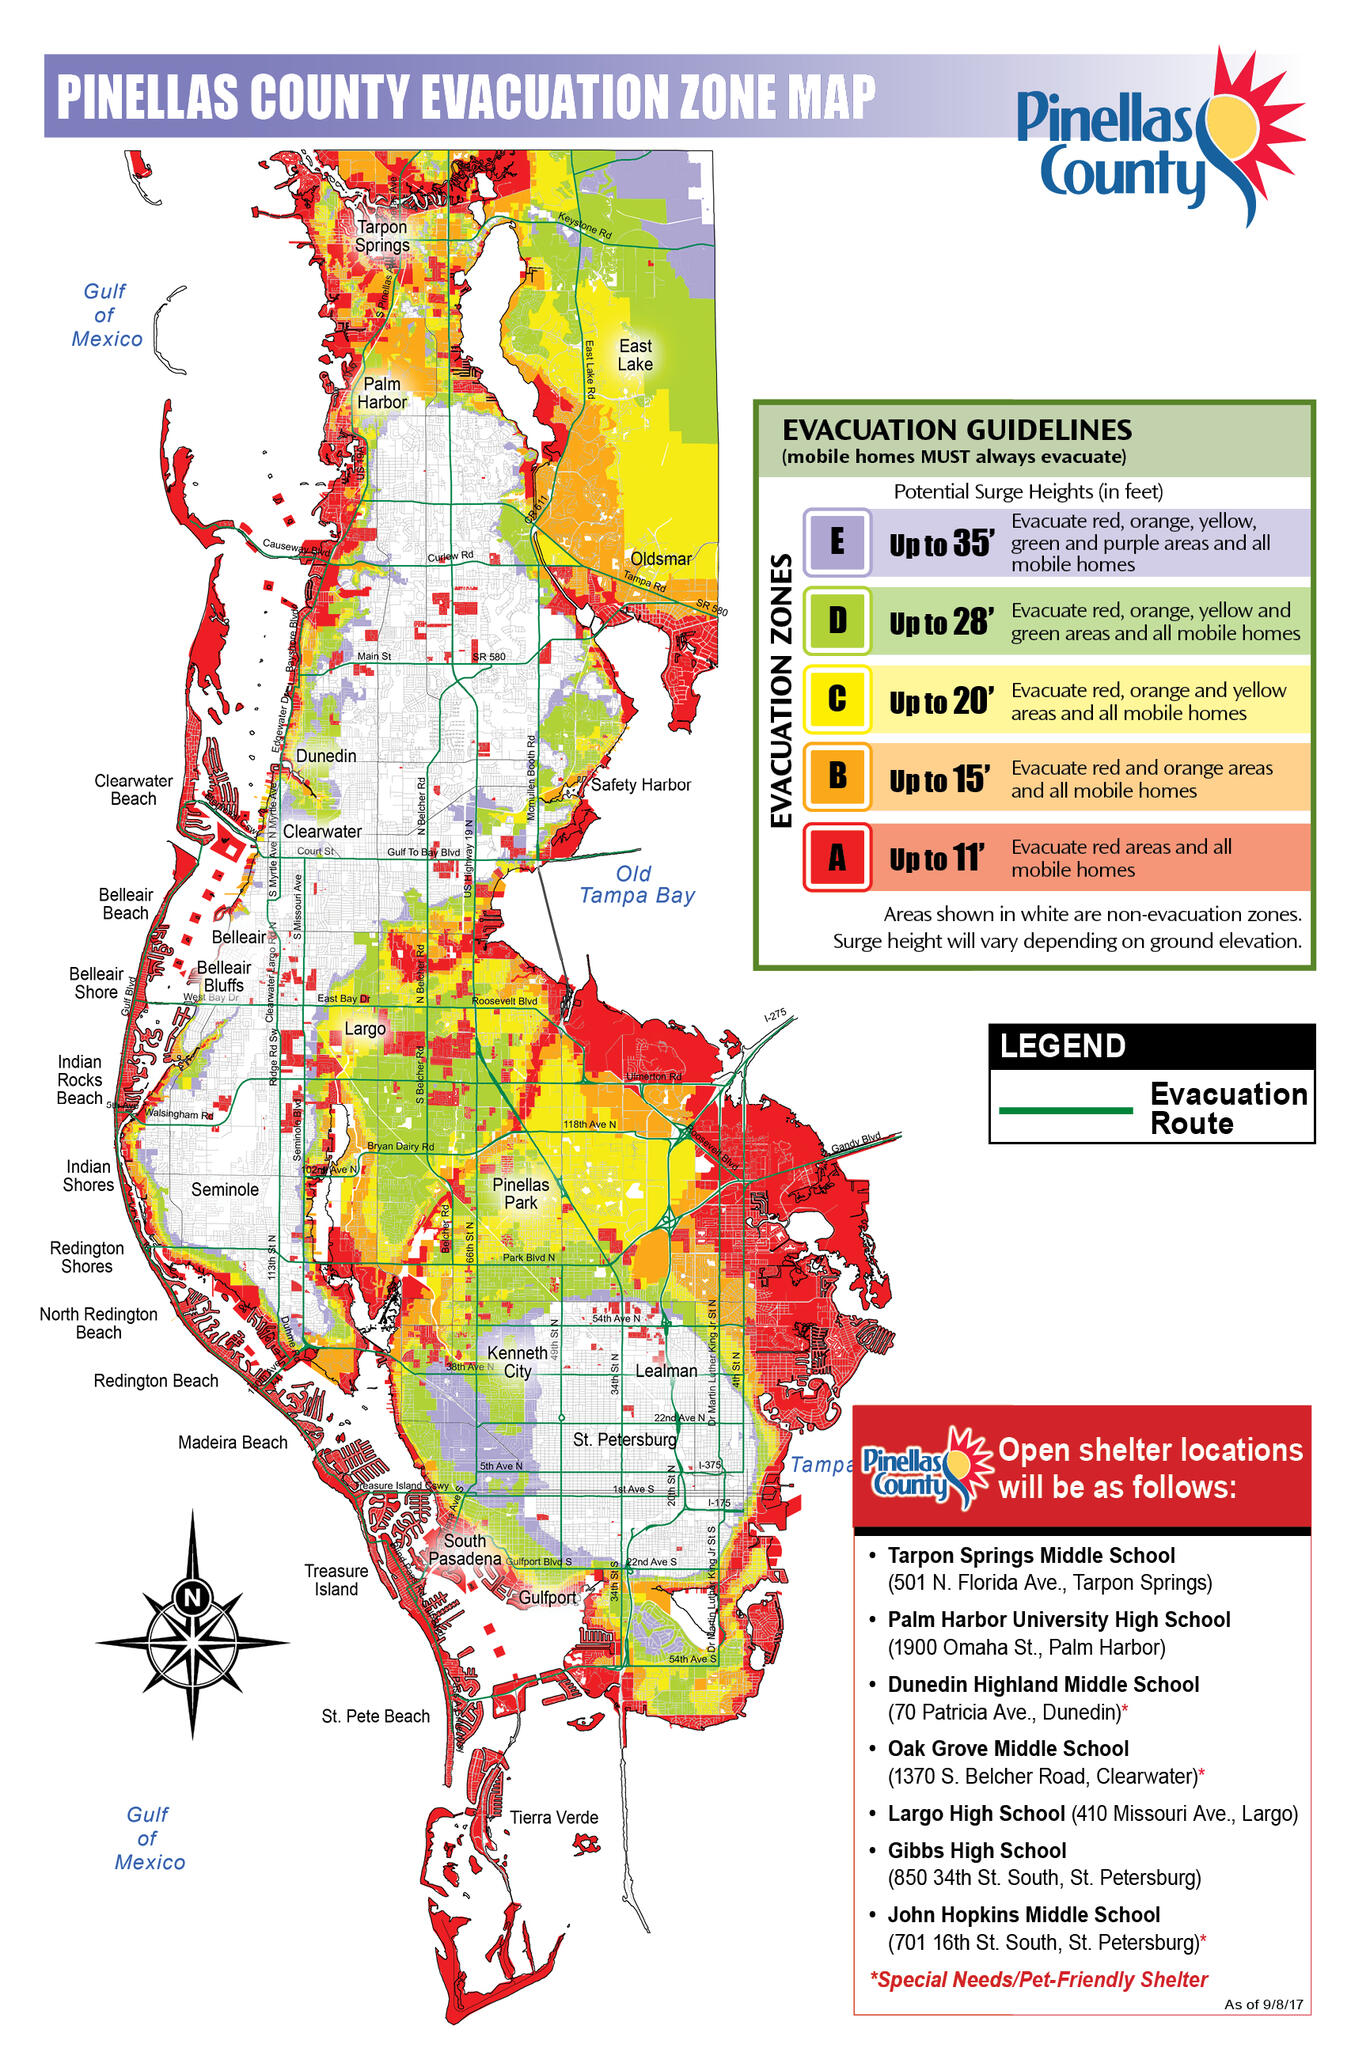 Level A evacuation underway; shelters to open at noon (Pinellas County ...